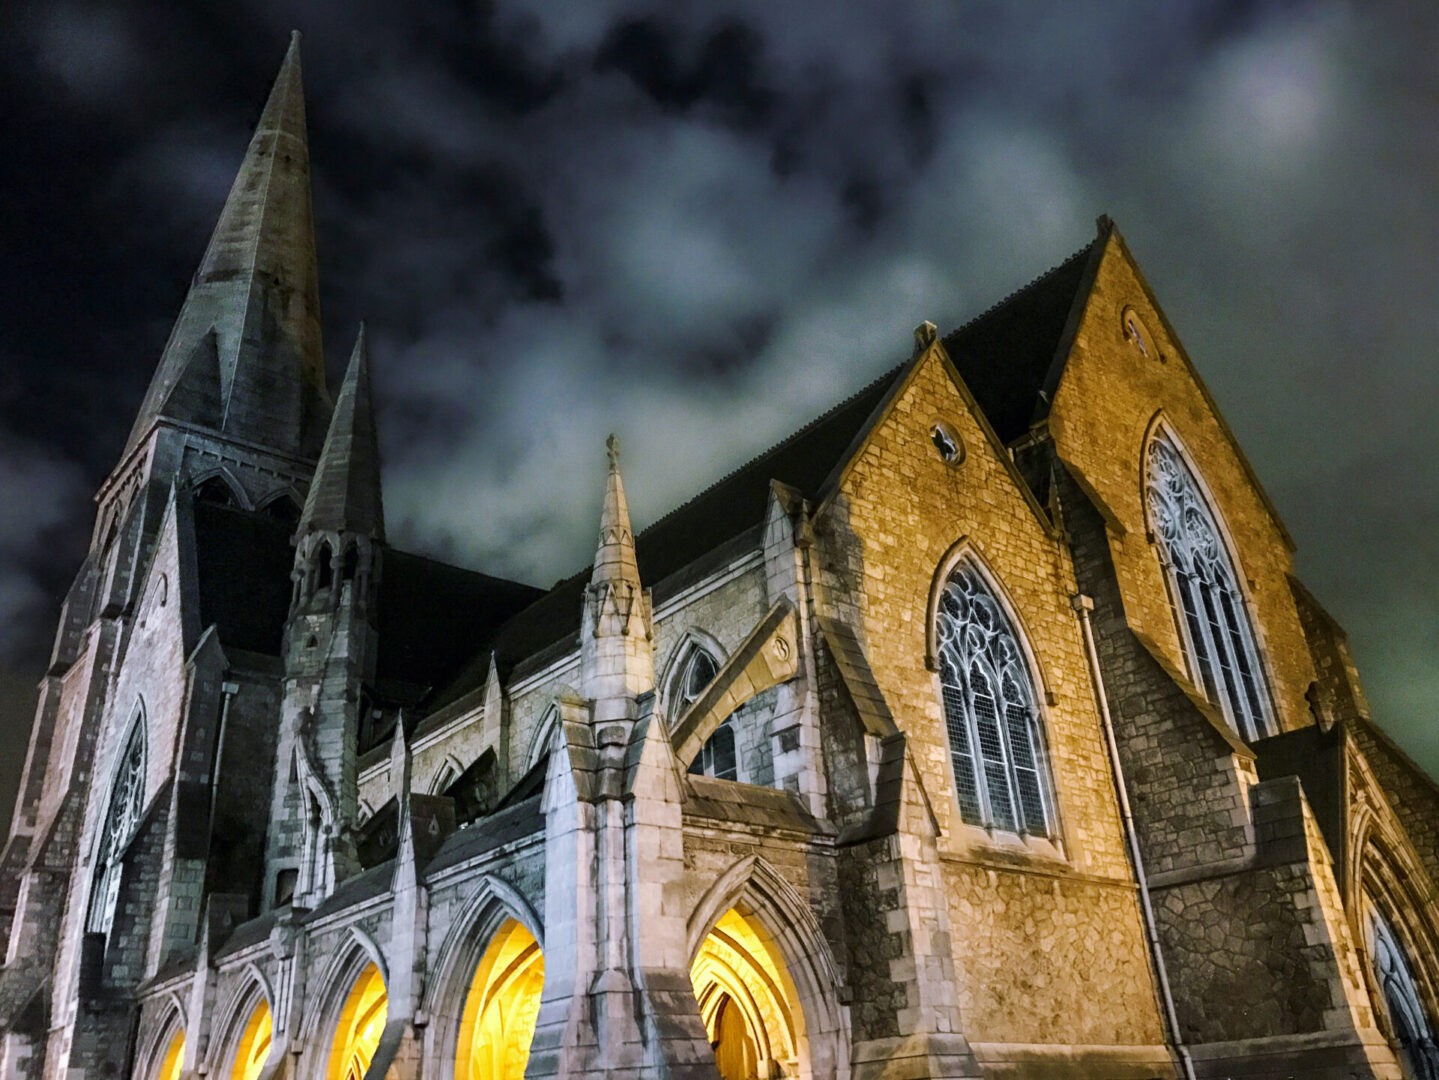 Exterior Night time photo of overcast skies and lit up Saint Andrews Church in Dublin, Ireland